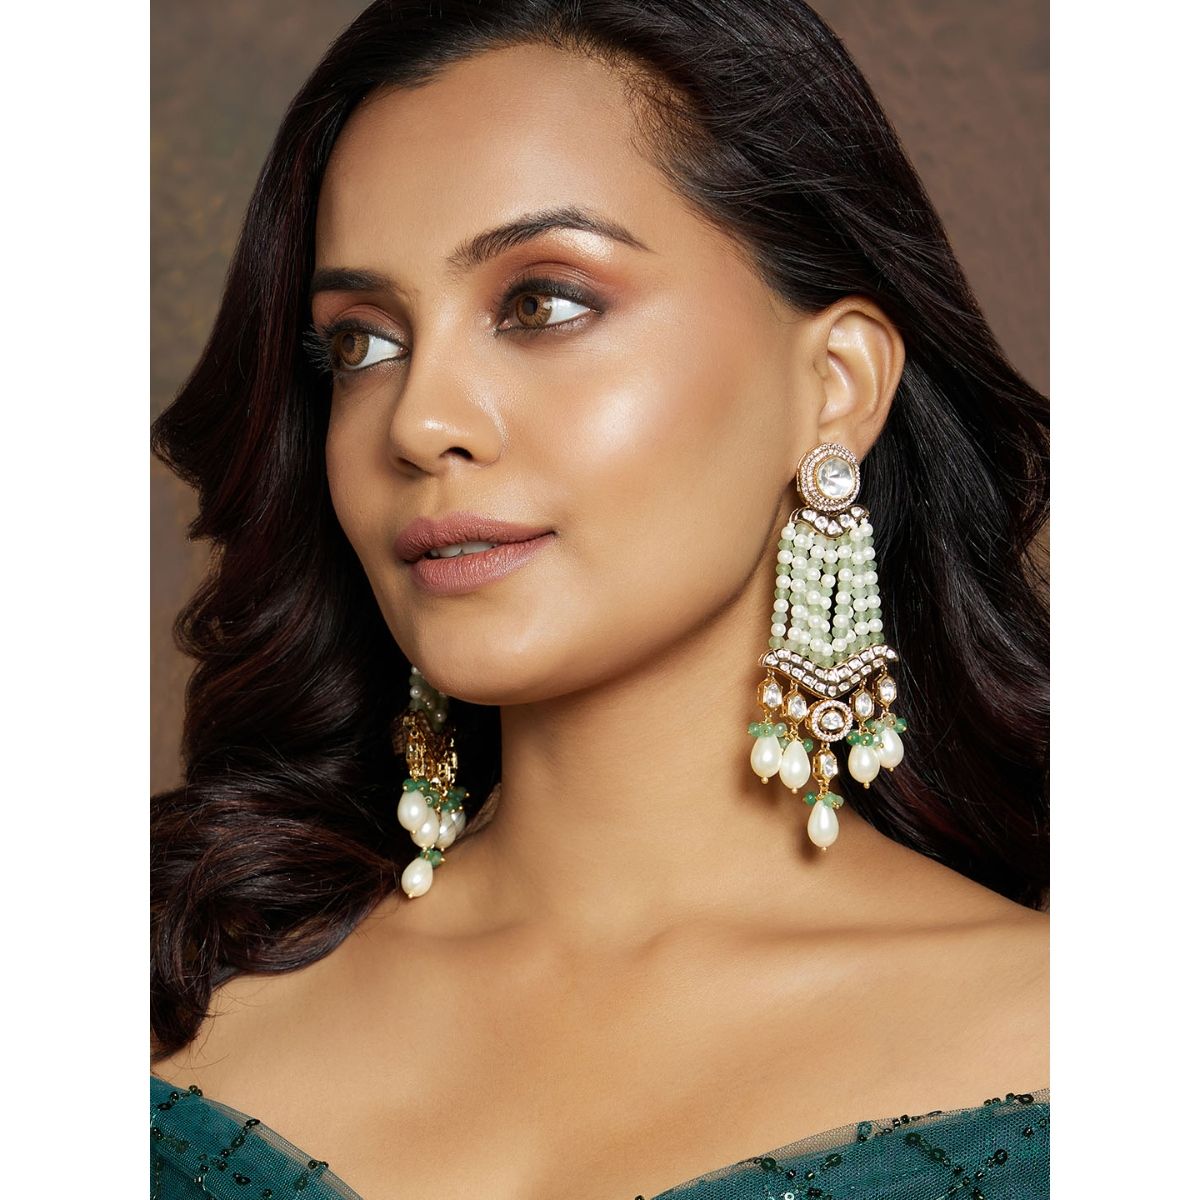 Saraf RS Jewellery Gold Toned Kundan Studded Pink Dropdown Chandelier  Earrings Buy Saraf RS Jewellery Gold Toned Kundan Studded Pink Dropdown Chandelier  Earrings Online at Best Price in India  Nykaa